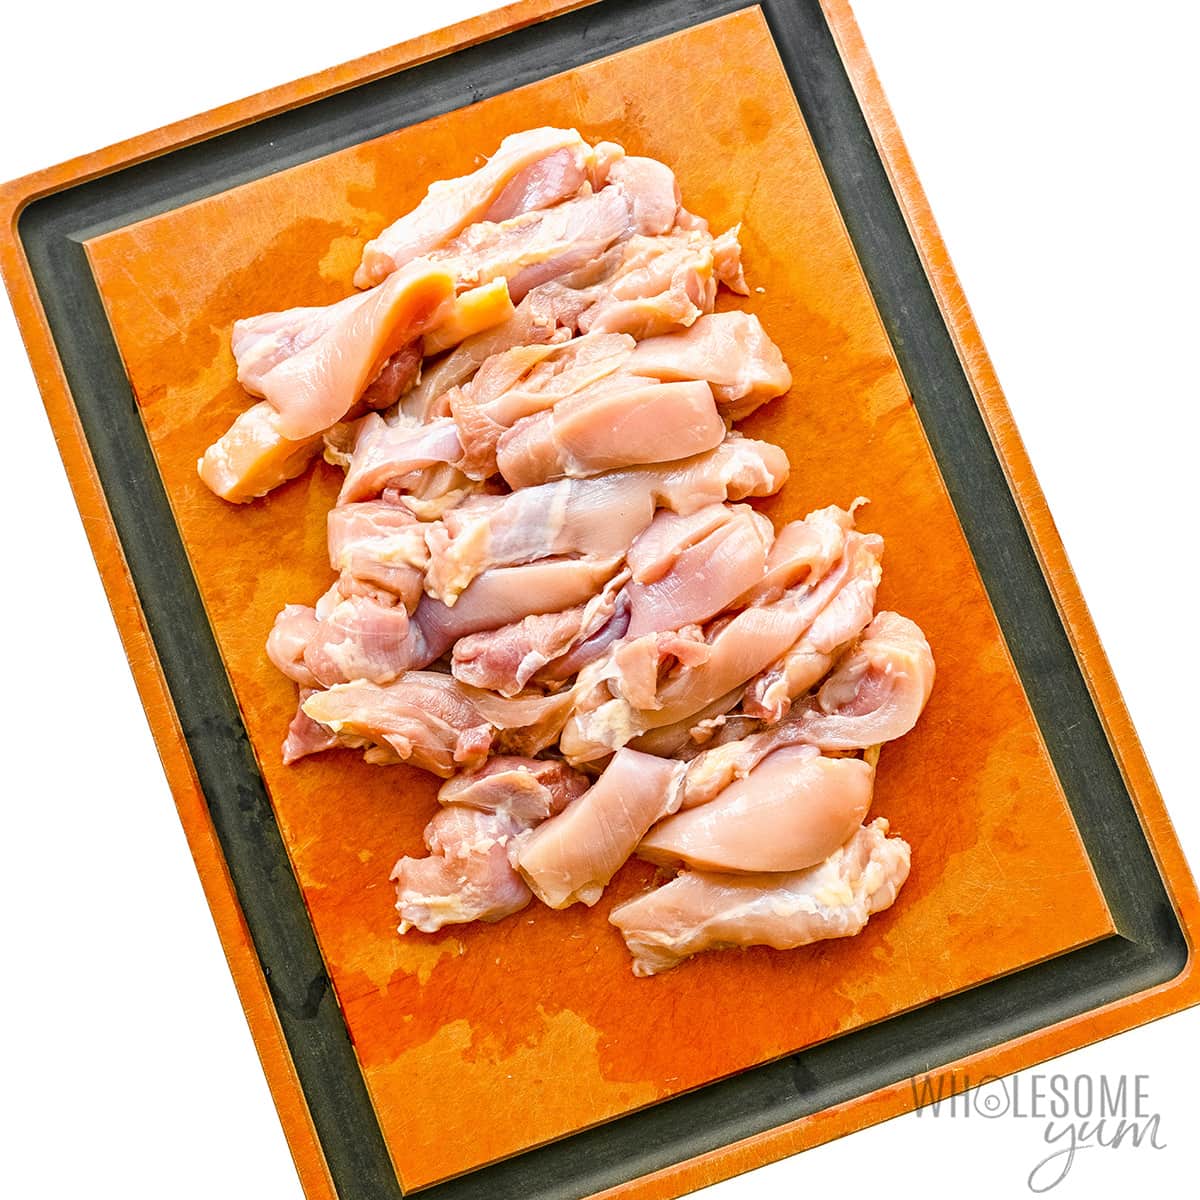 Chicken sliced into strips on a cutting board.